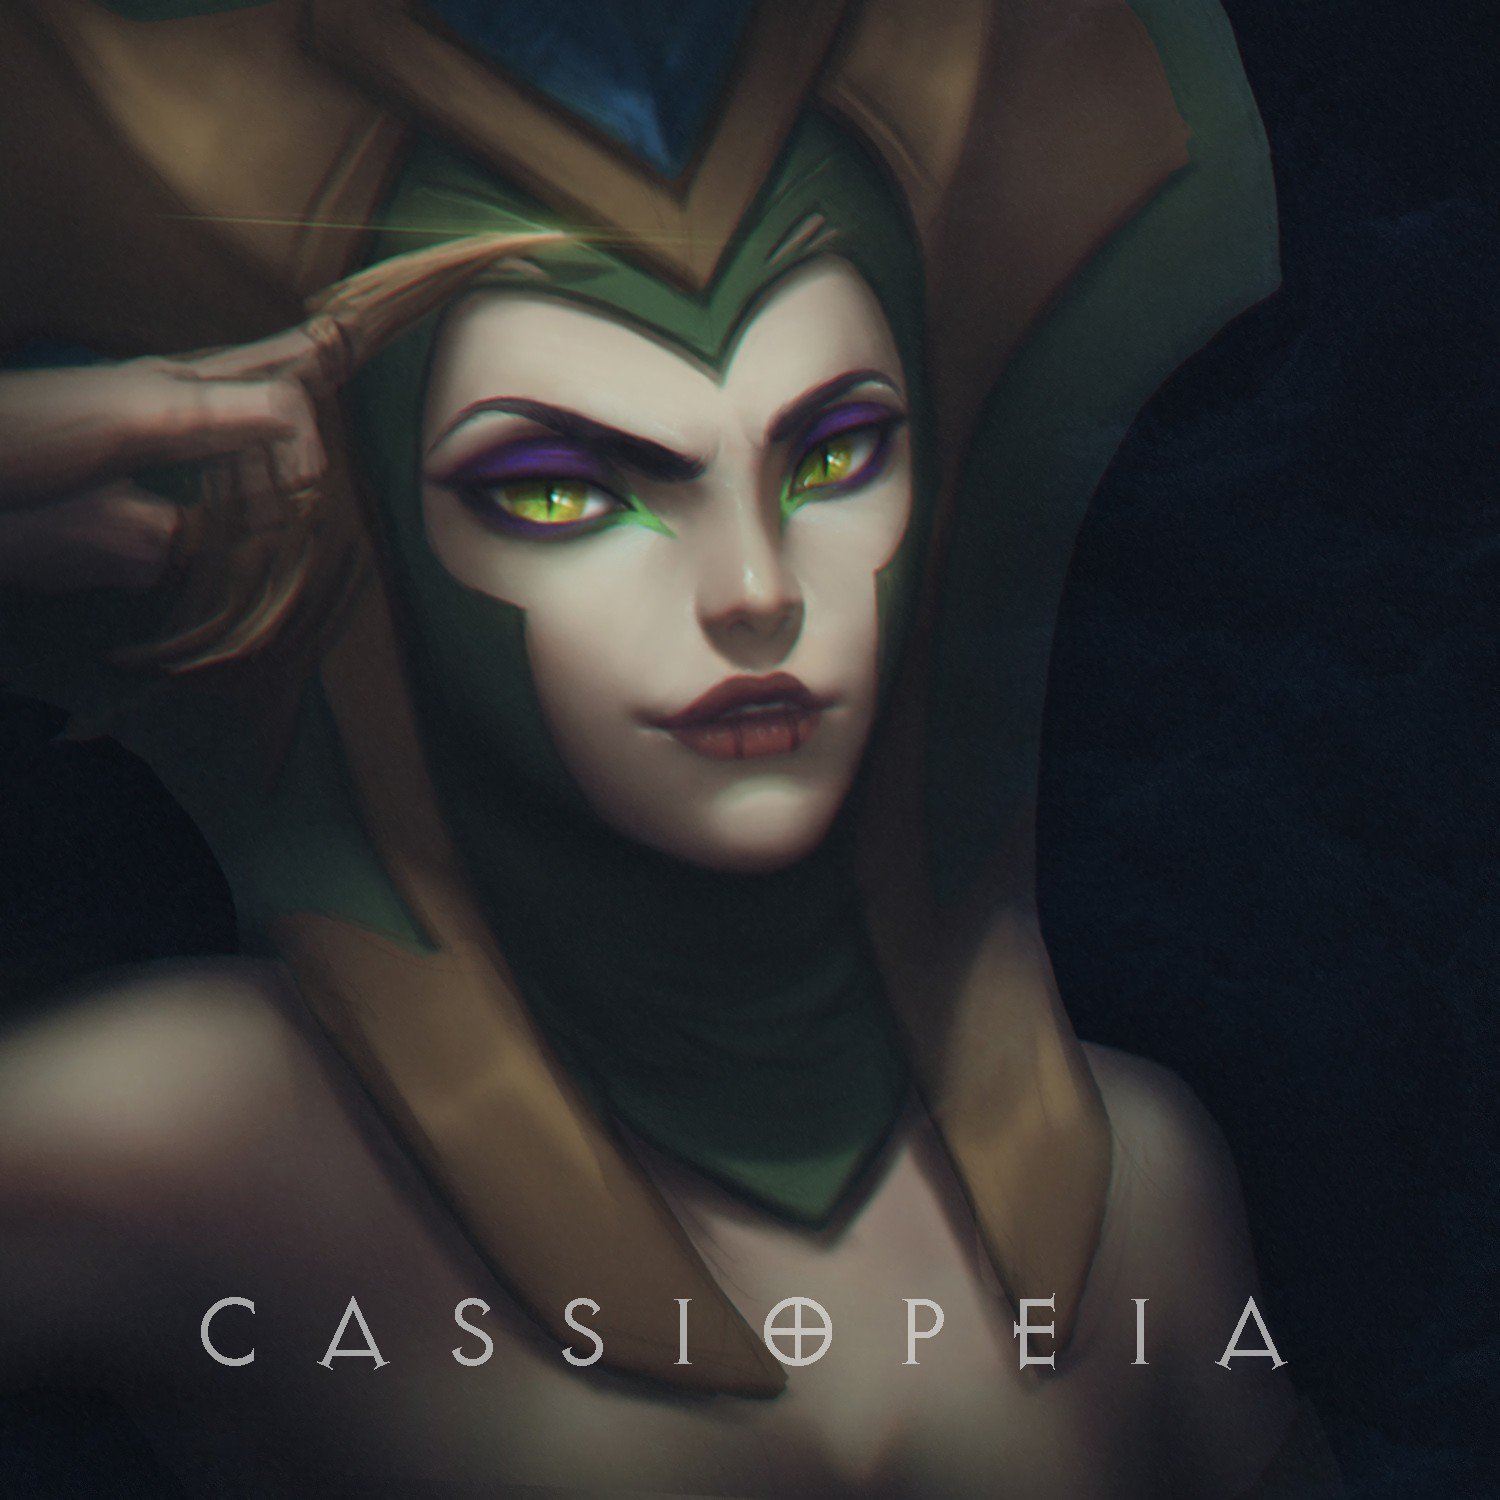 Cassiopeia by 白狩Valet HD Wallpaper Background Official Art Artwork League of Legends lol